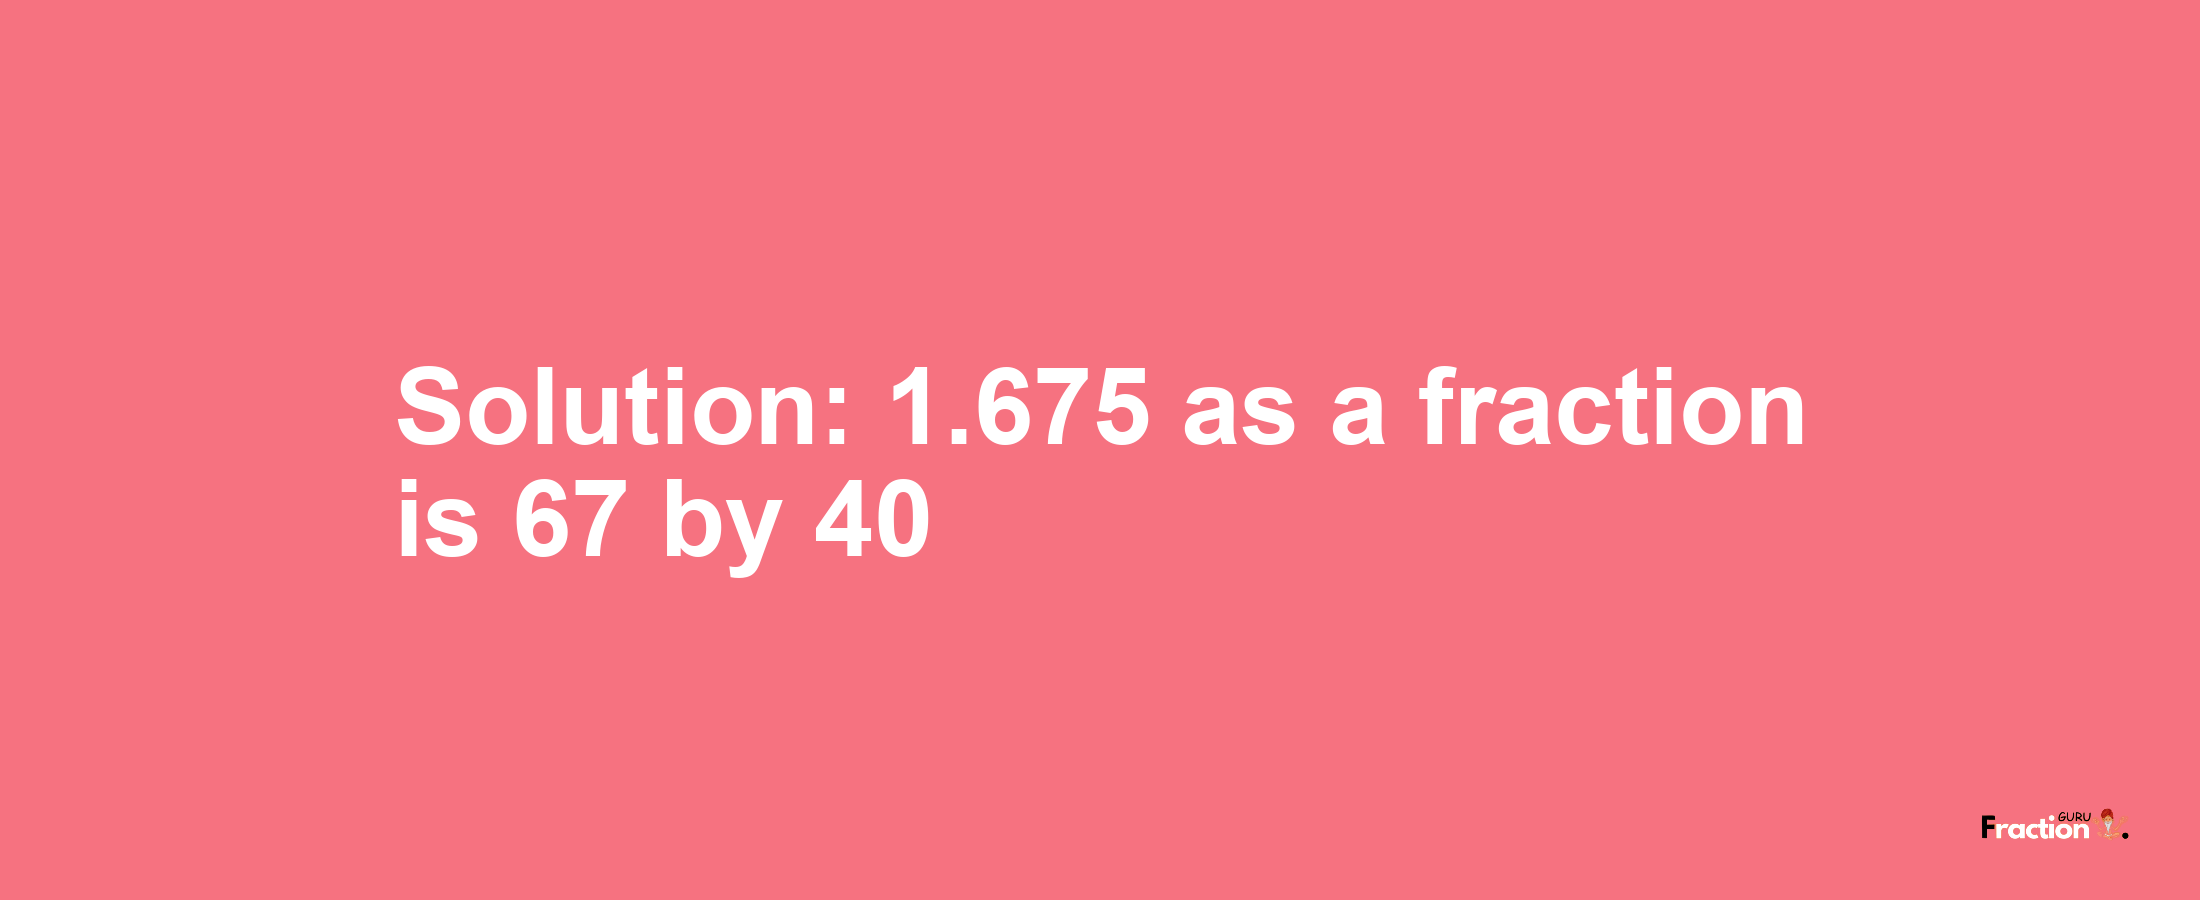 Solution:1.675 as a fraction is 67/40